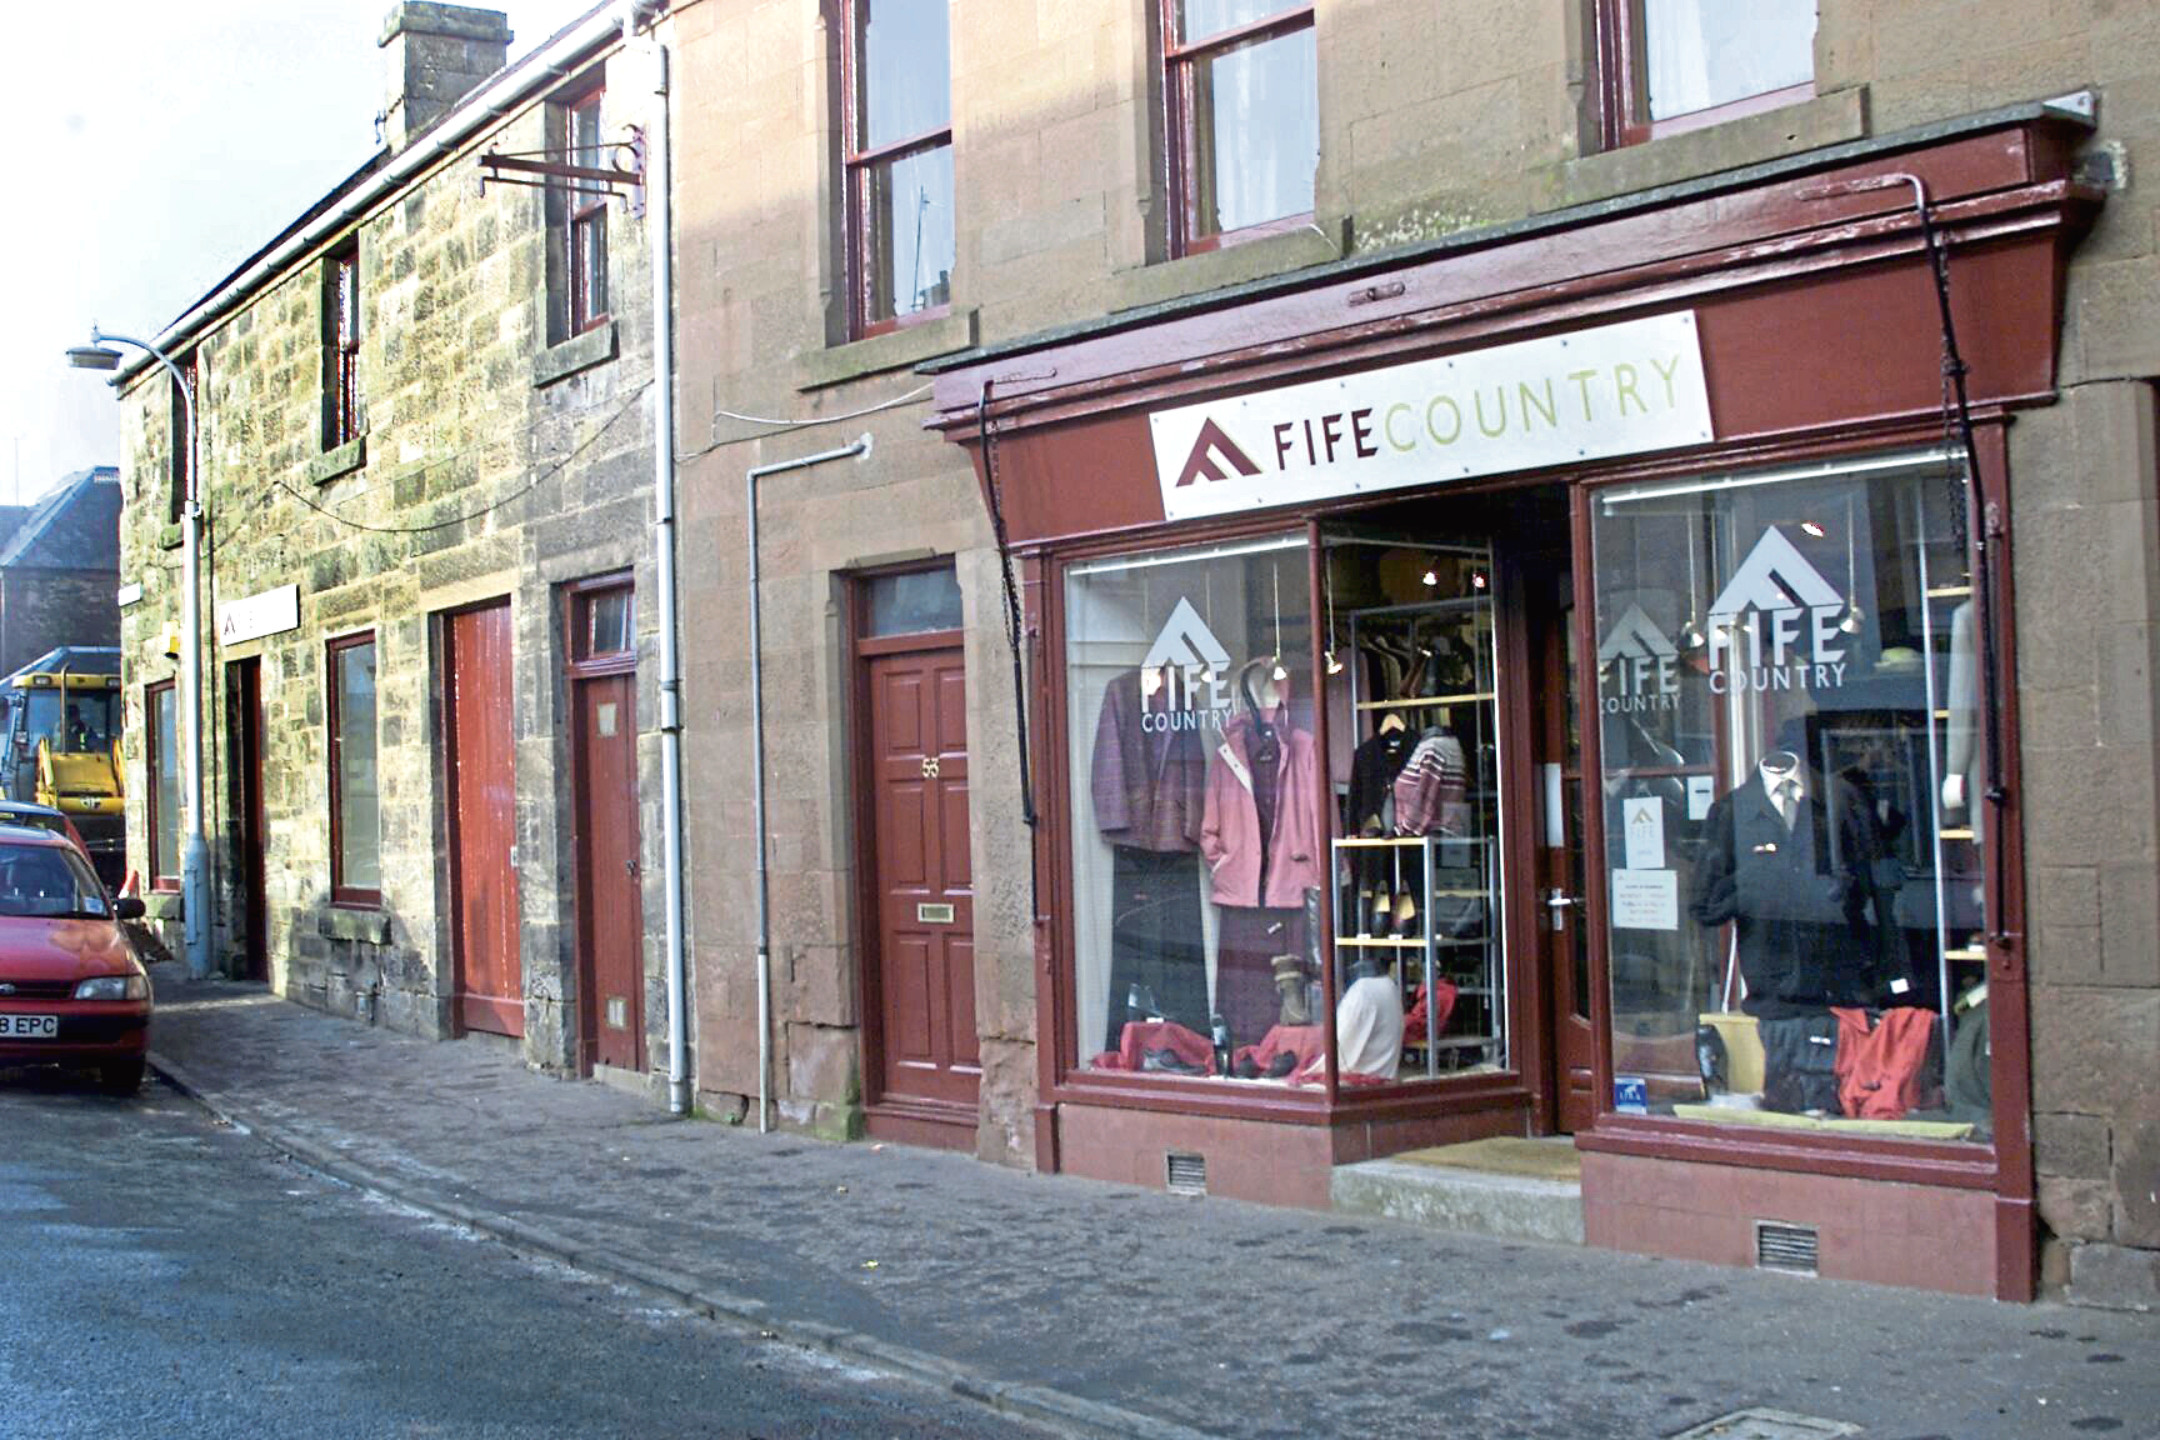 Premises of clothing firm Fife Country.